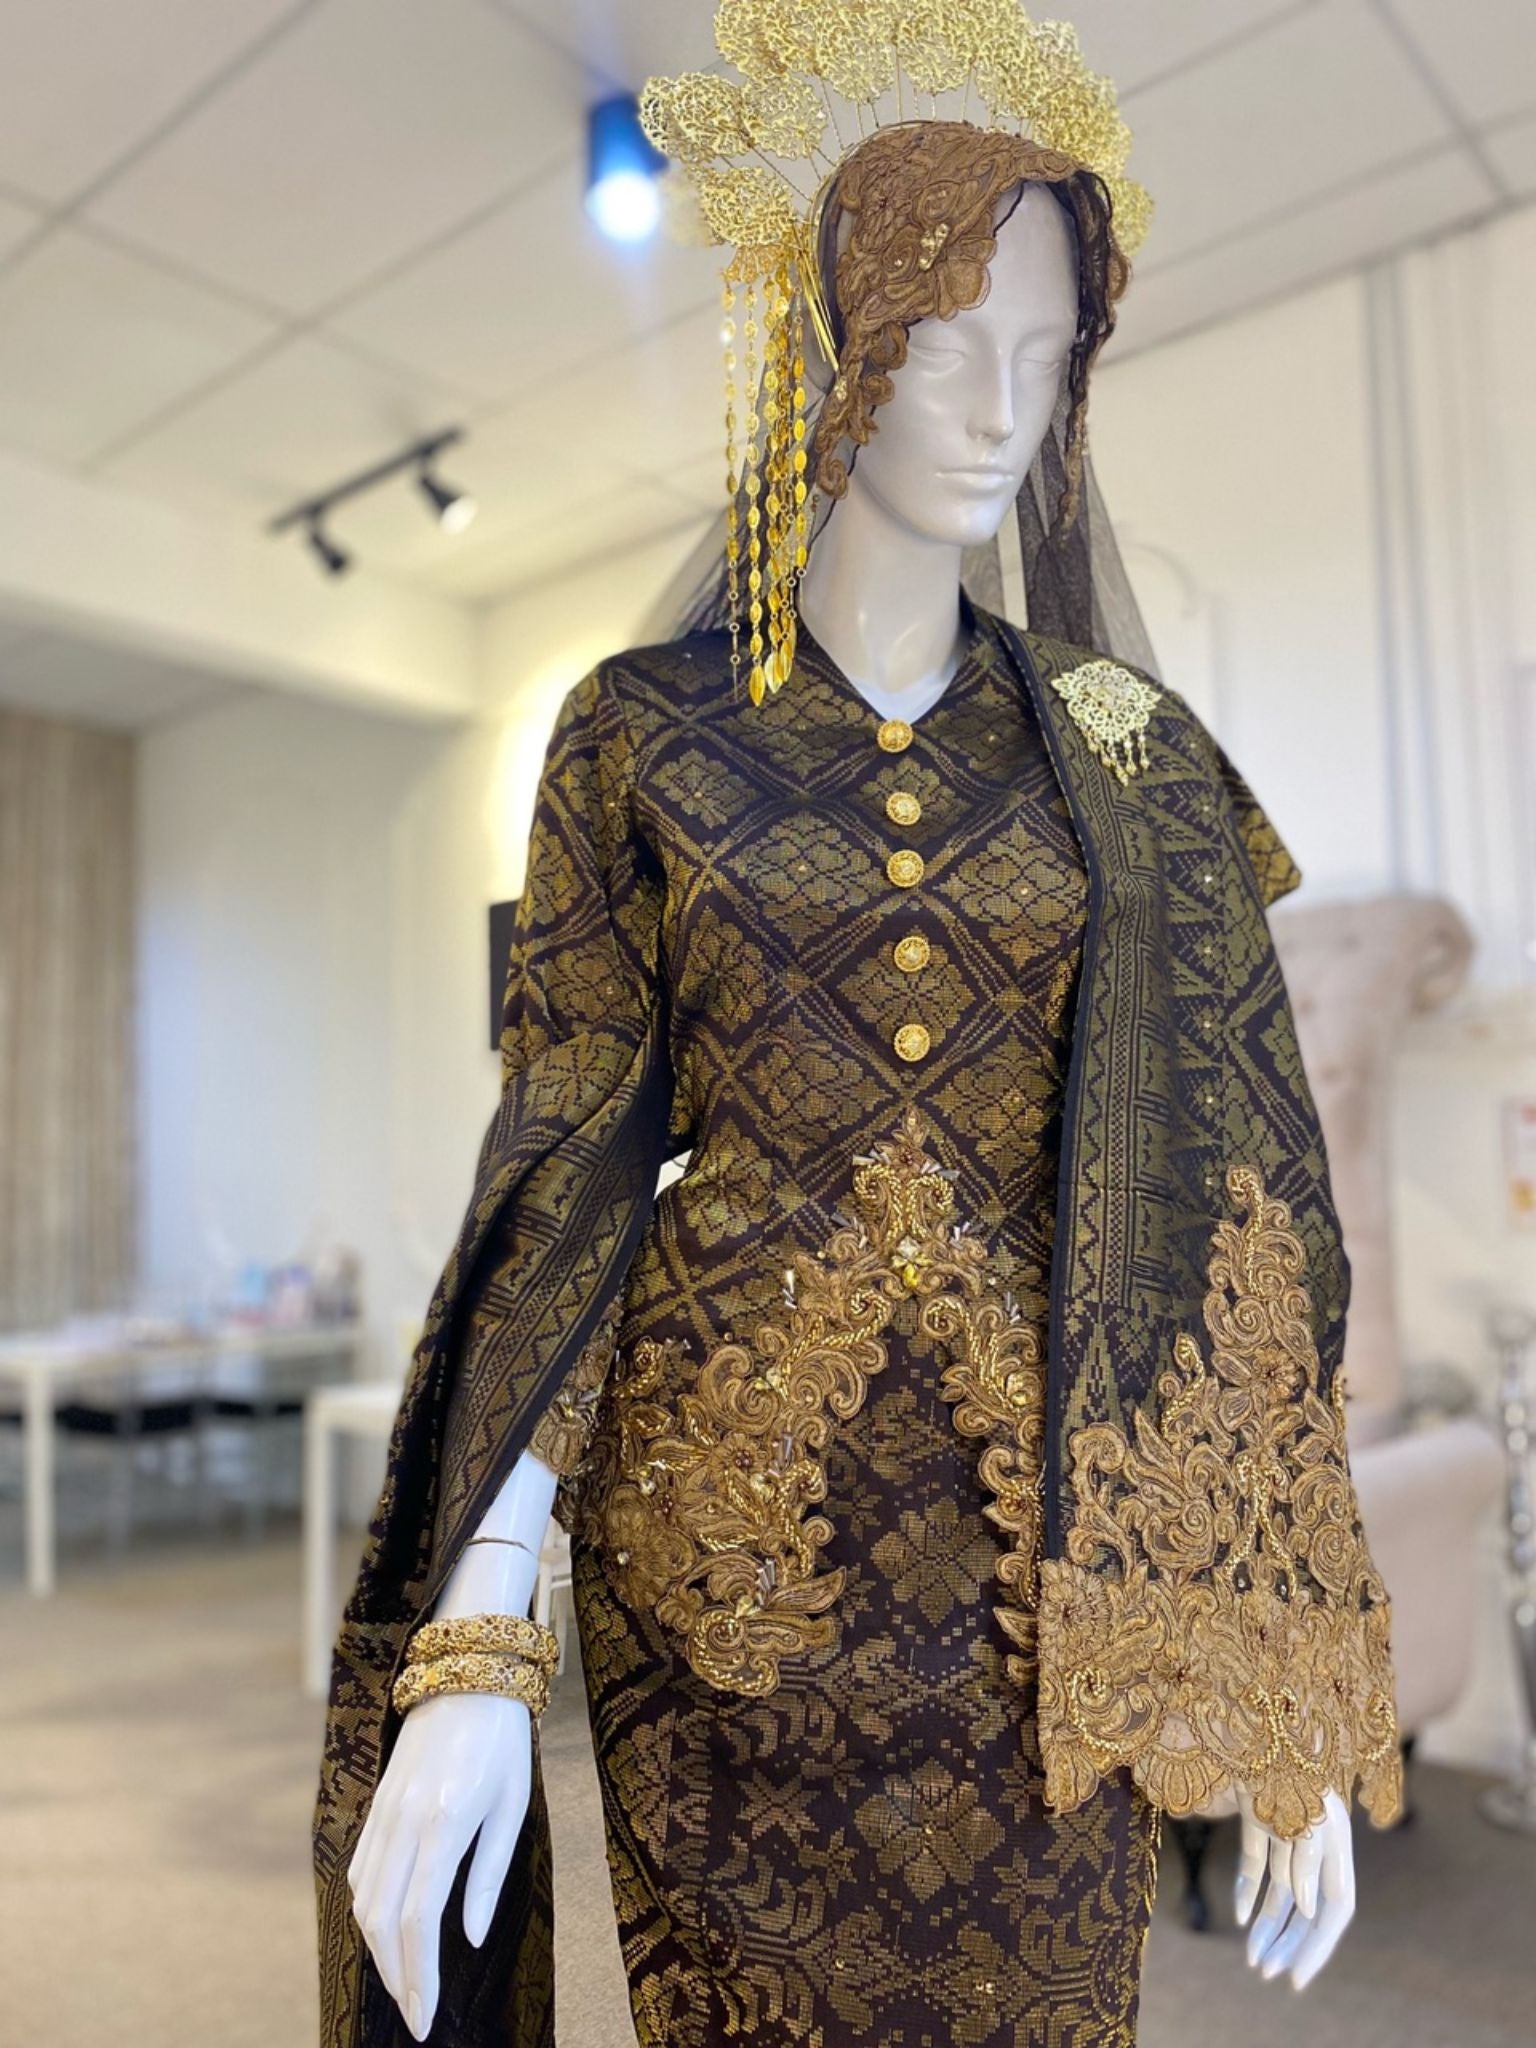 CENDANA - Baju Pengantin Kurung Pendek Dark Coco Brown and Gold Songket with Beaded Lace Detailing. Modern Traditional and elegant wedding dress with Dark Coco Brown and Gold songket fabric, featuring delicate beaded lace detailing on the bodice. Perfect for any Malay wedding. Available for rent in Malaysia and Singapore.